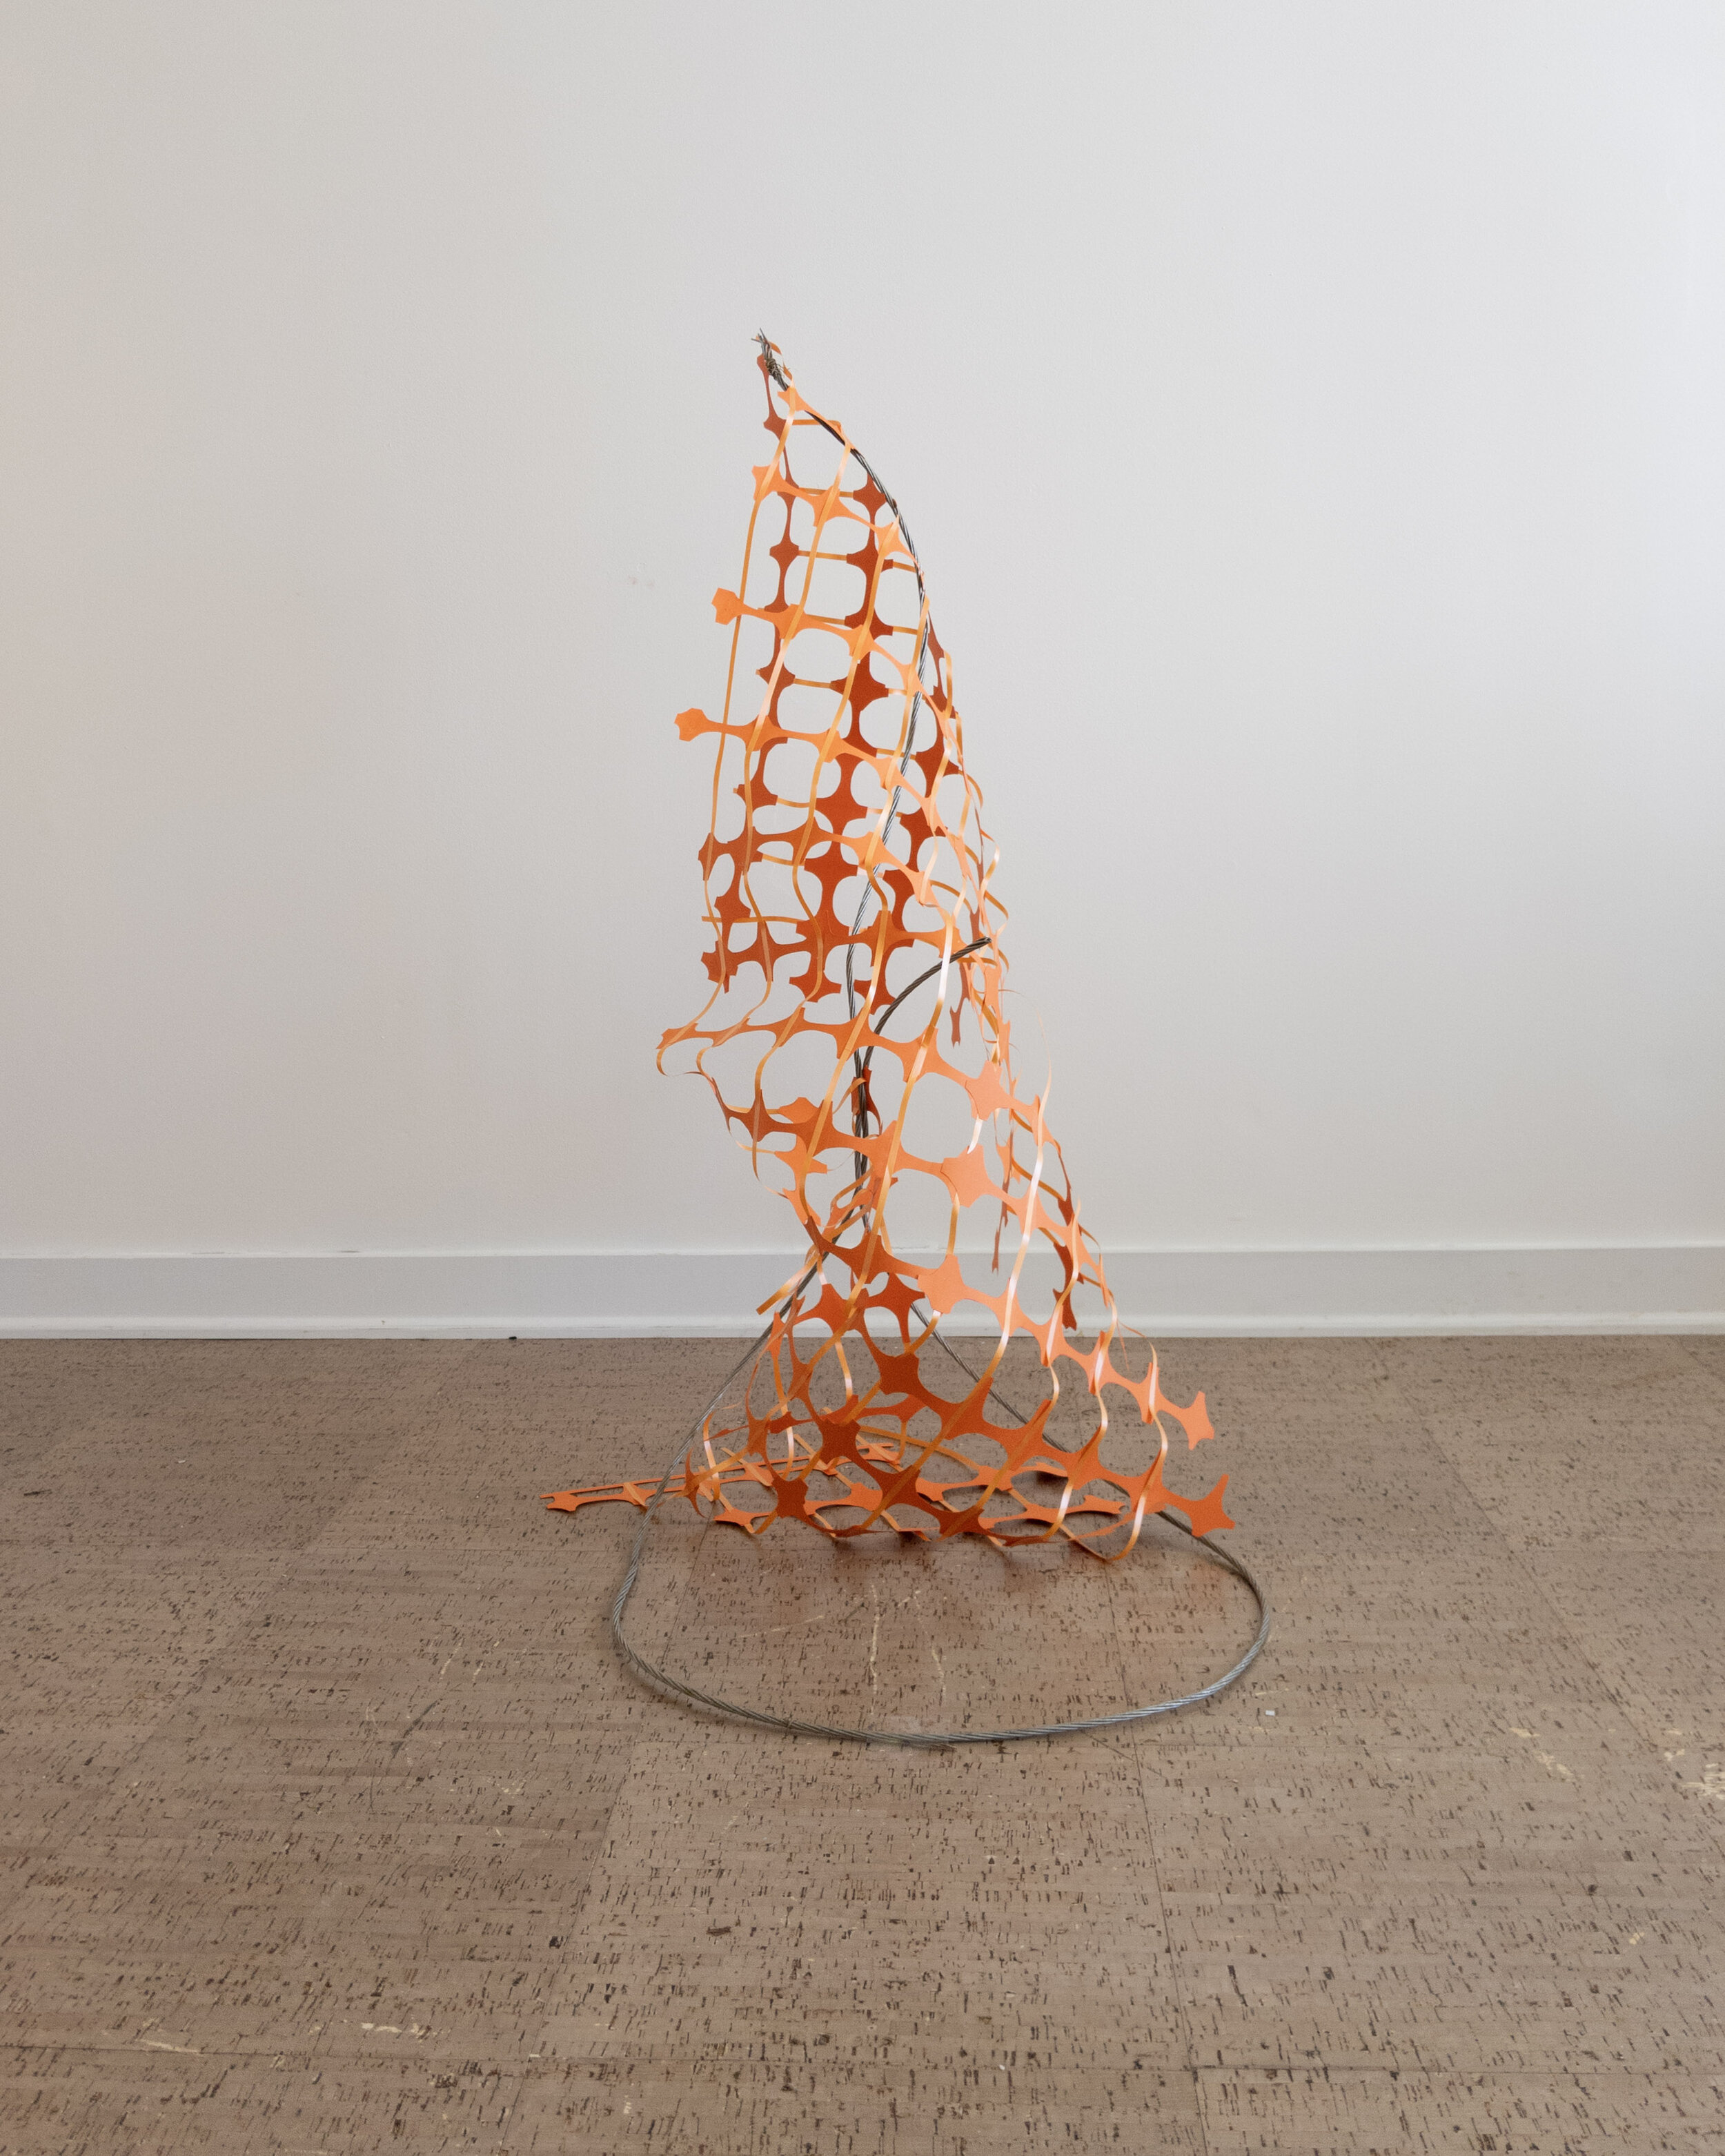   Caught Fence ,  paper, gift ribbon, and found cable, 20x40” Dimensions Variable,2020   